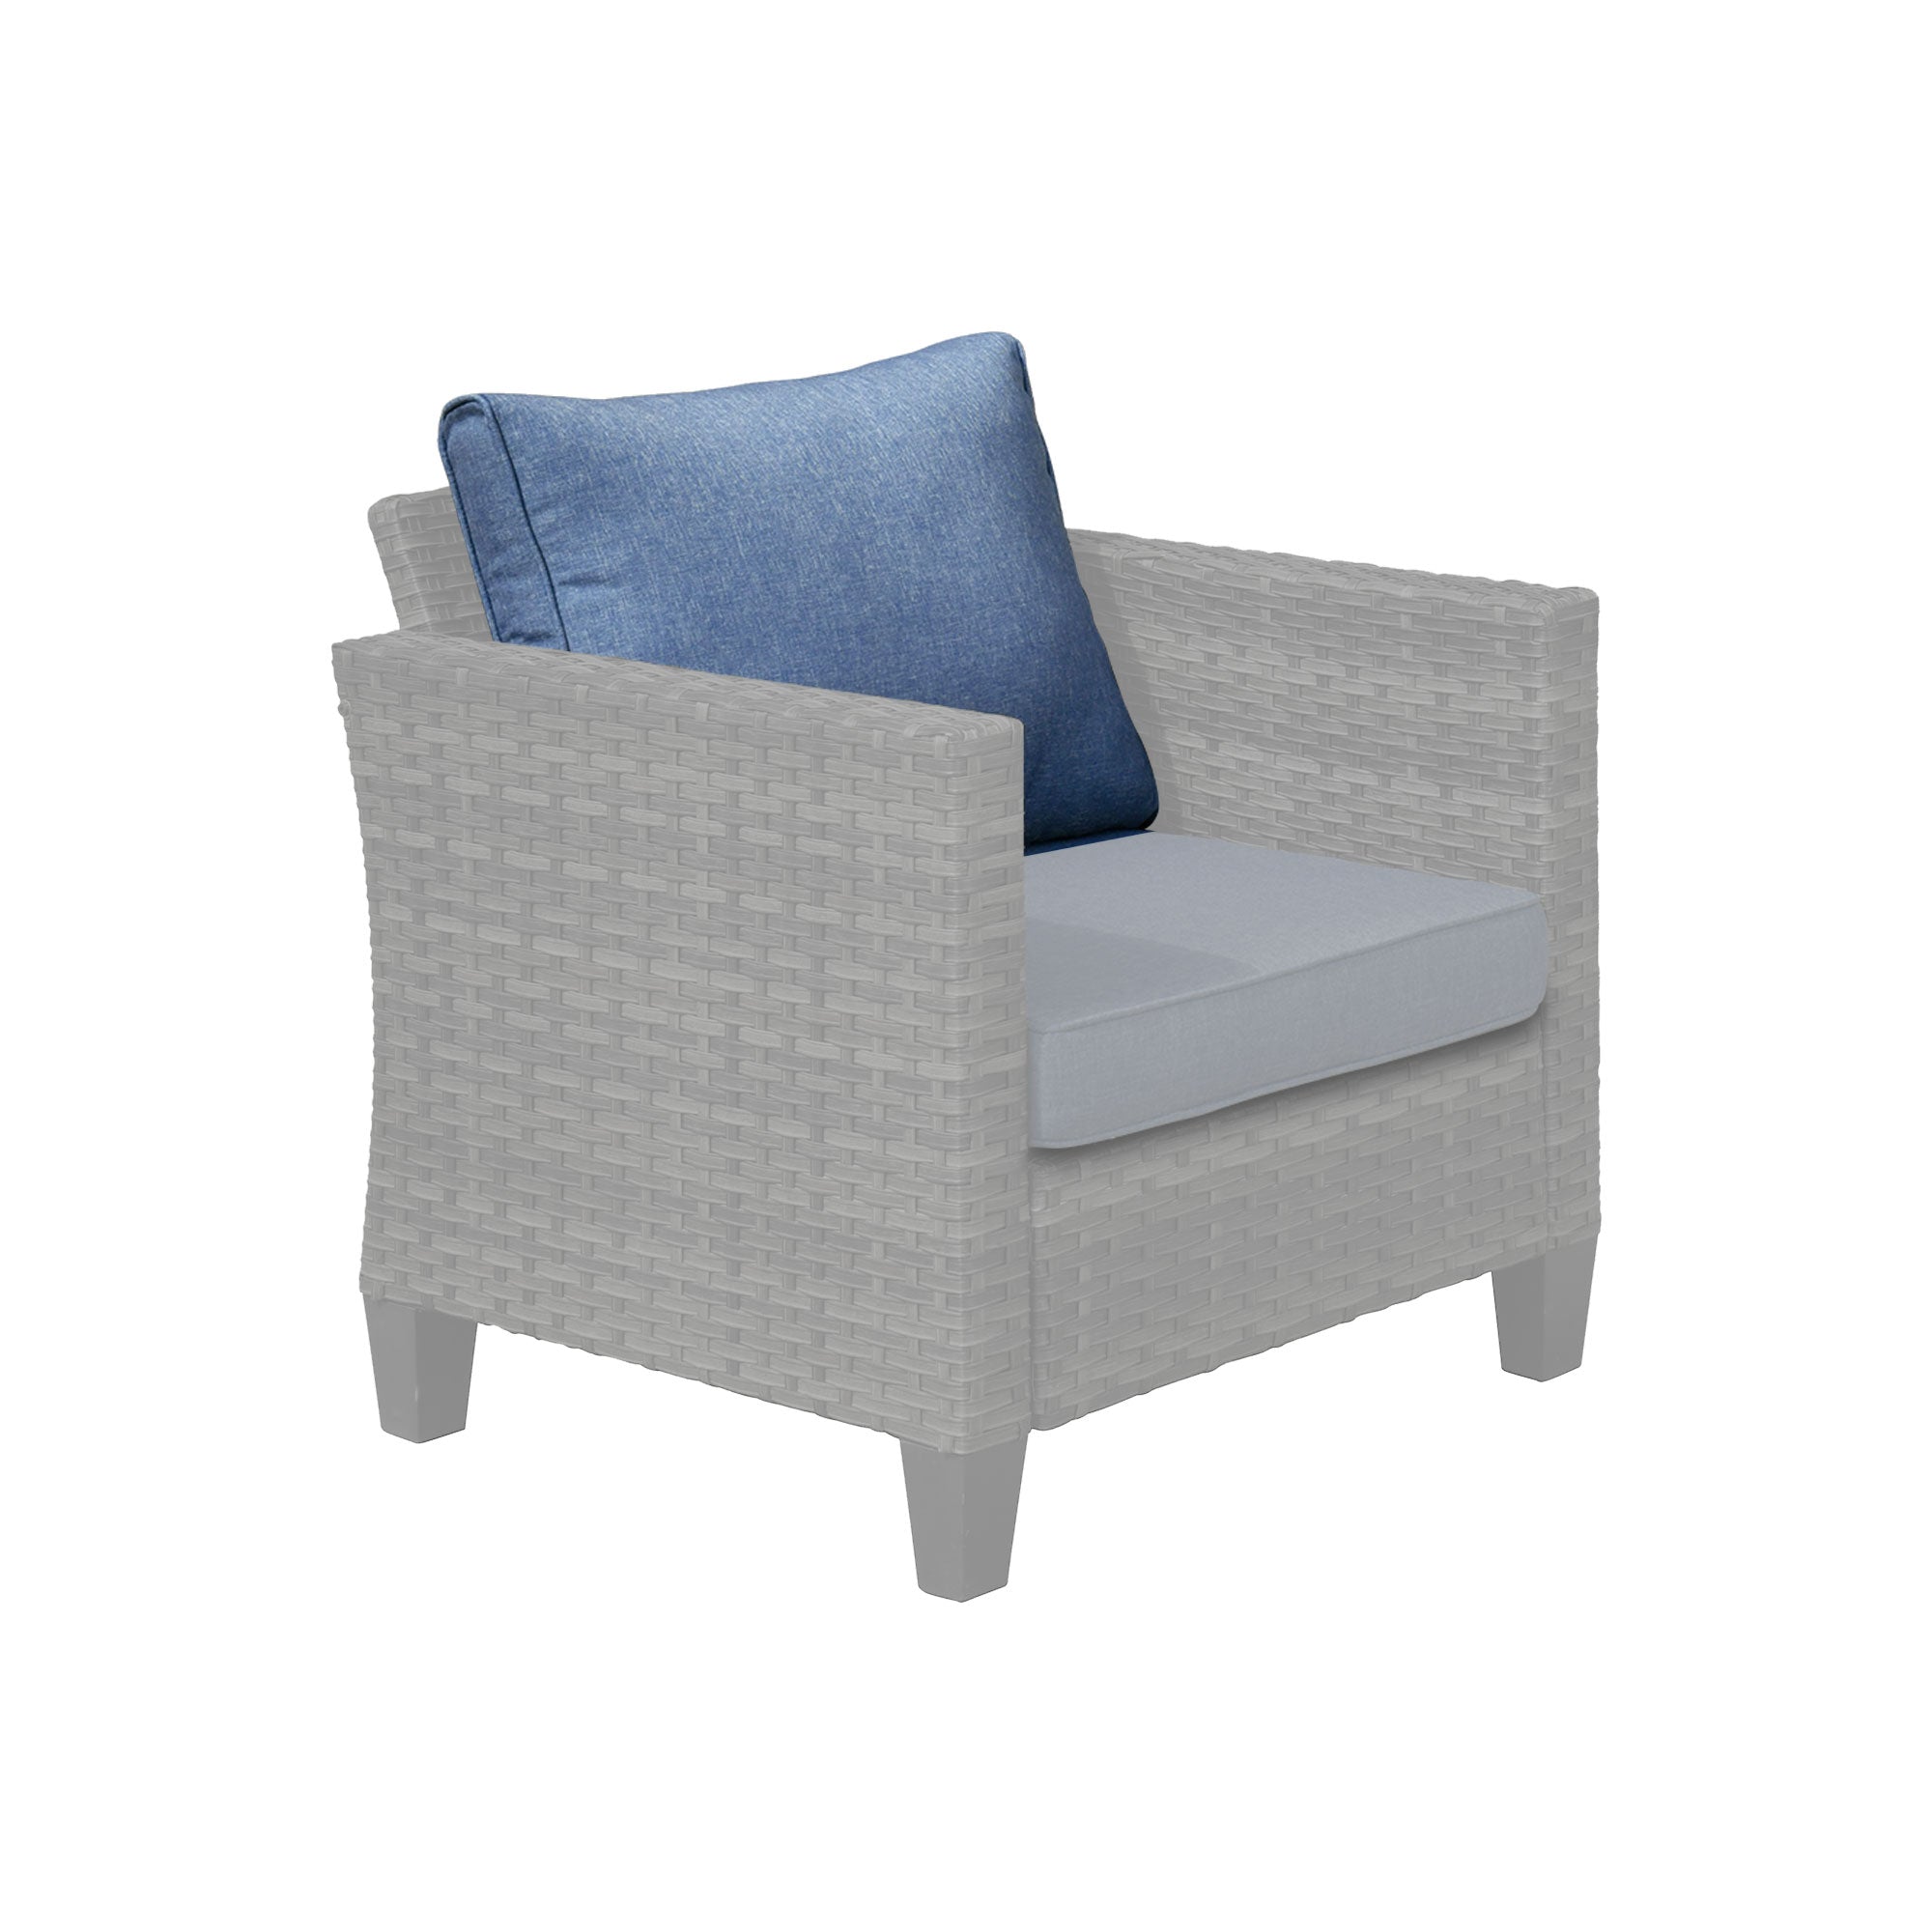 Ovios Vultros Series Replacement Seat, Back, Ottoman Cushion (Refer to the Dimension in Description)